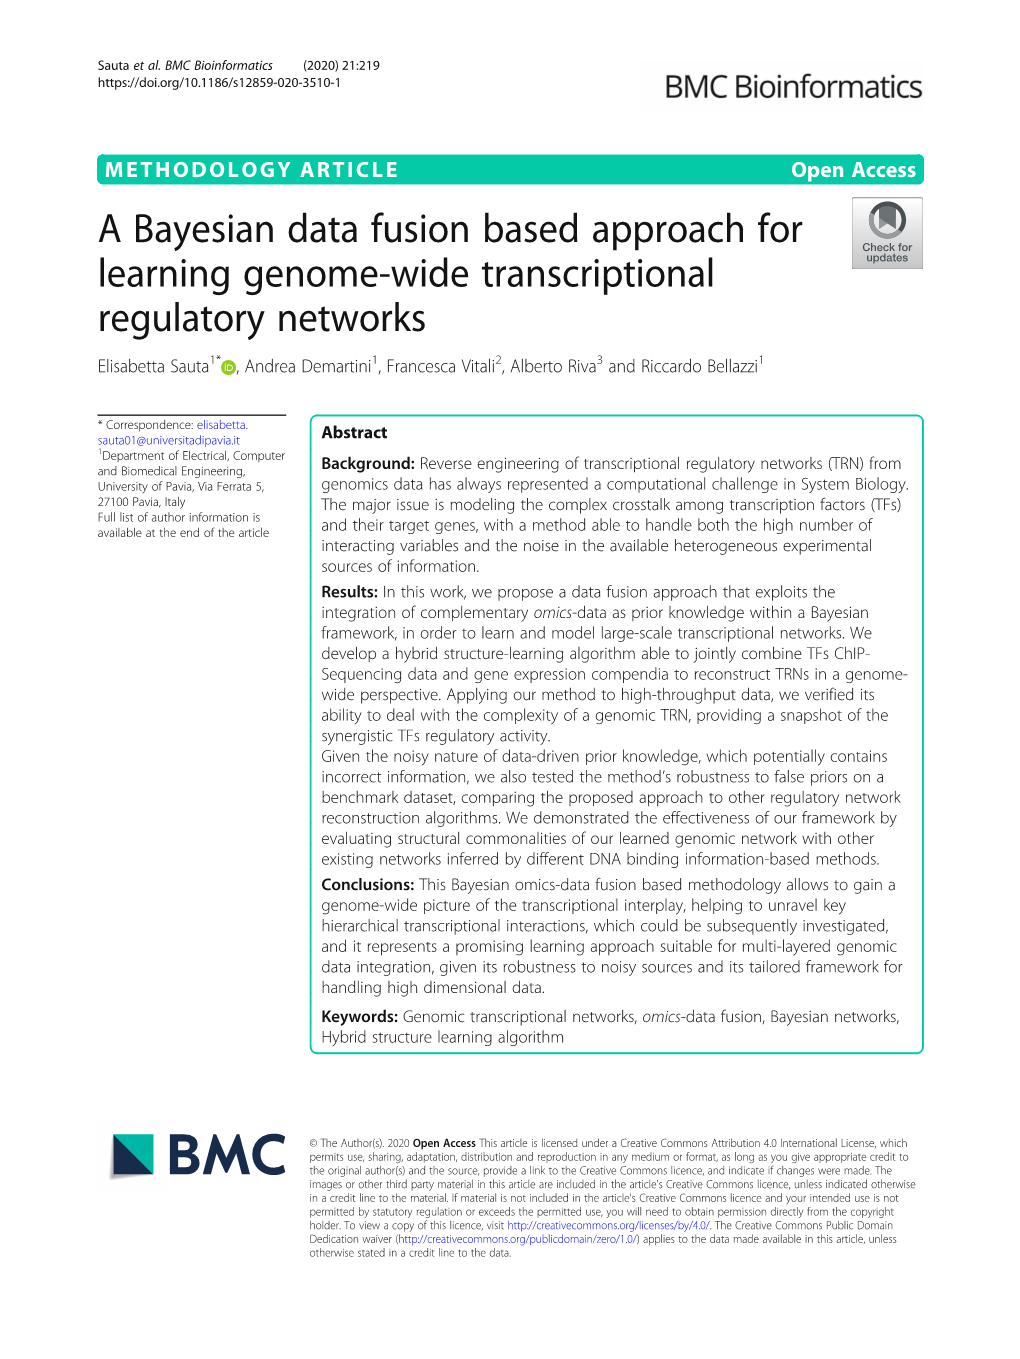 A Bayesian Data Fusion Based Approach for Learning Genome-Wide